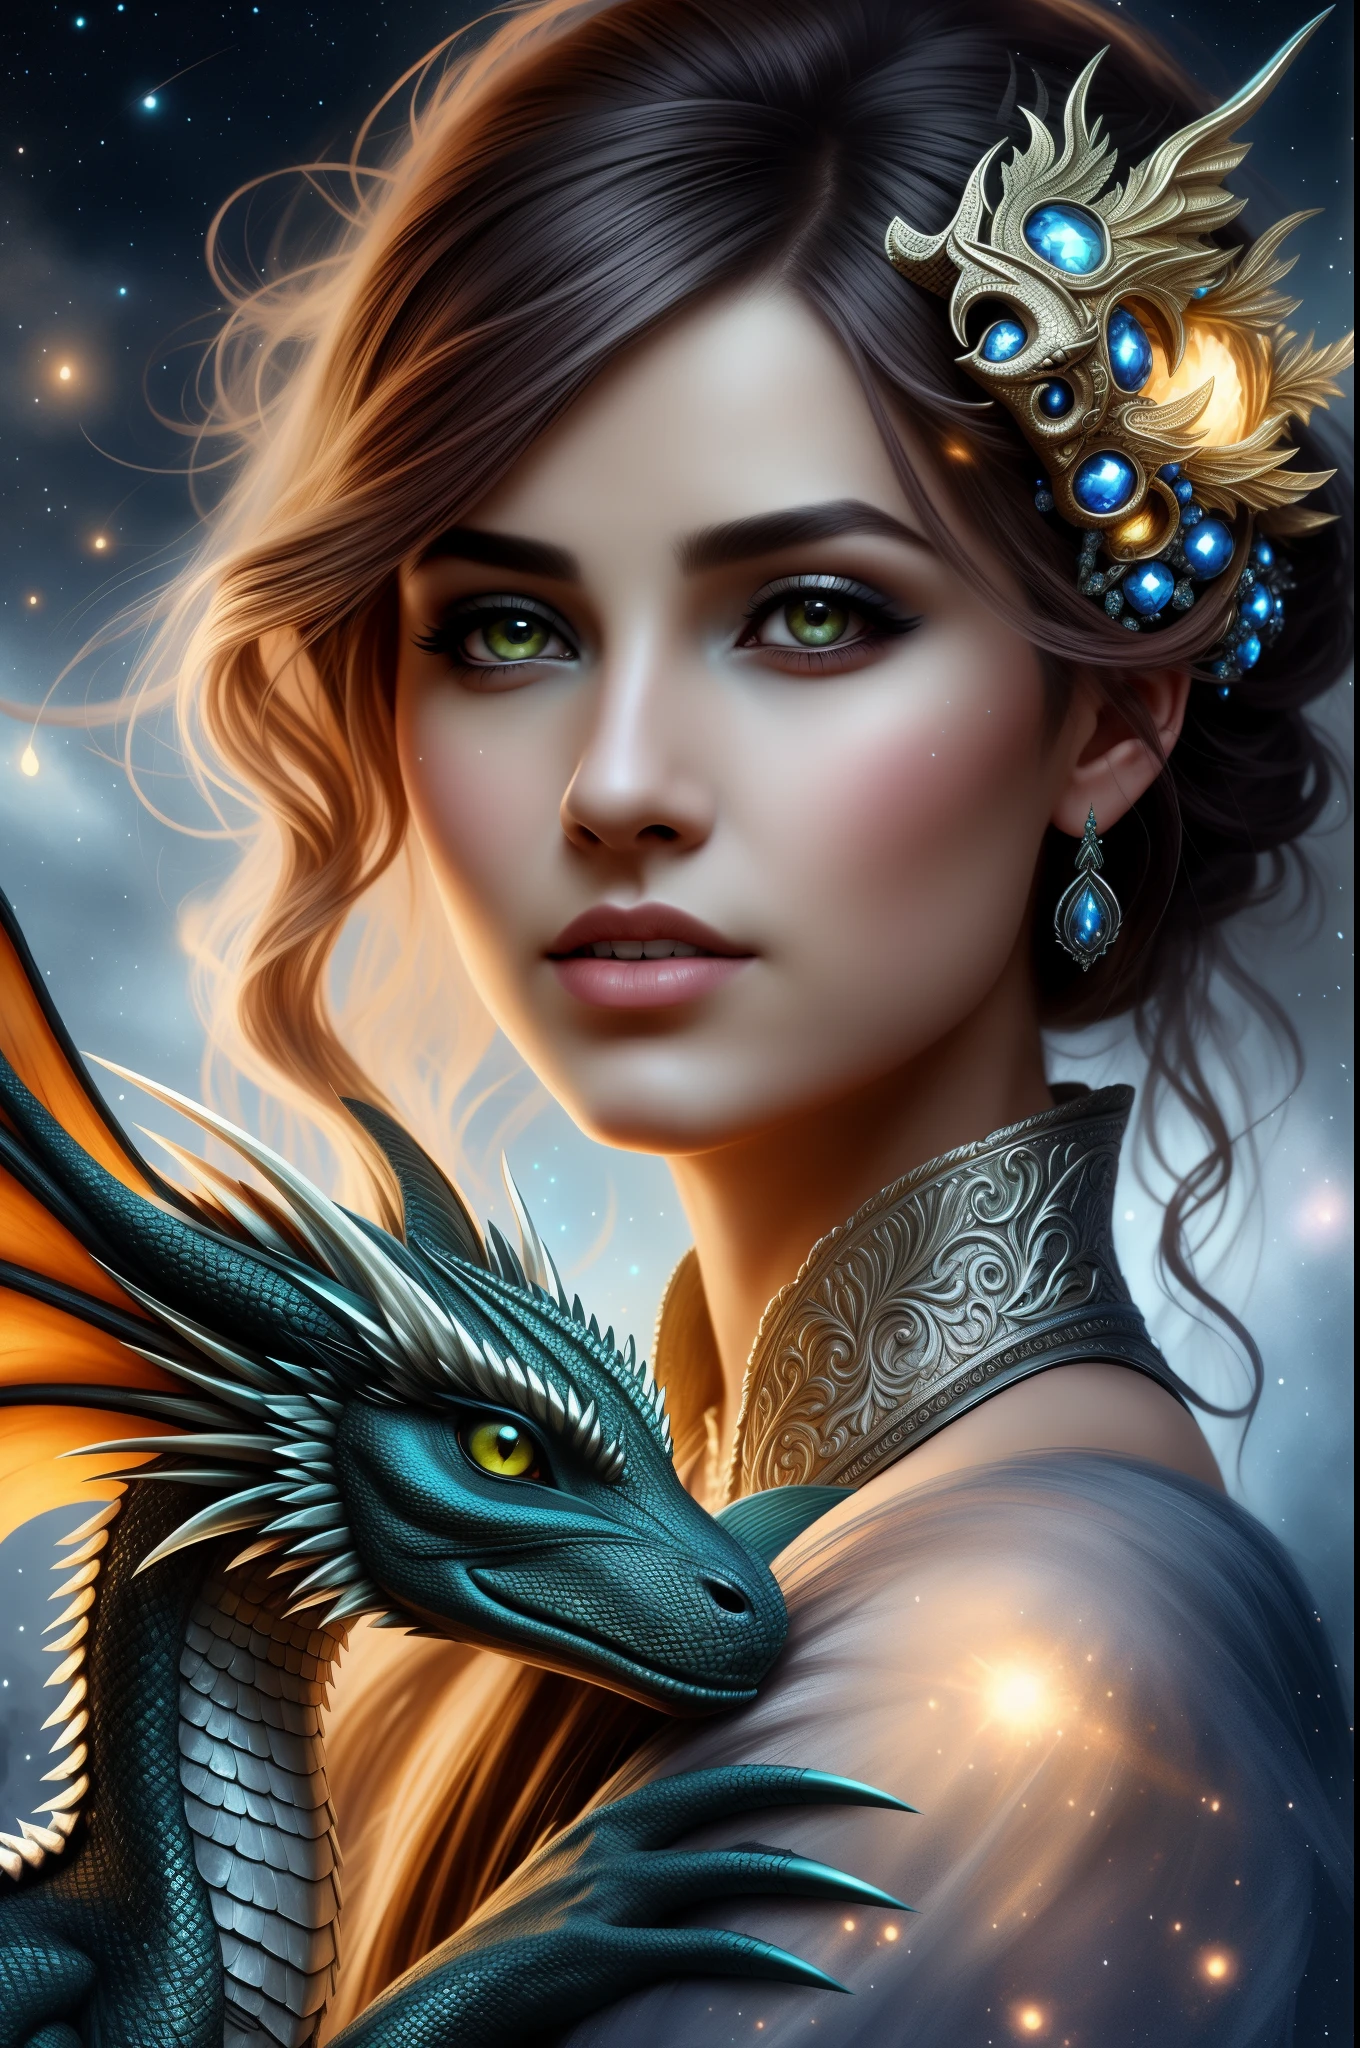 there is a dragon that is sitting in front of a clock, dragon portrait, dragon art, chinese dragon concept art, colossal dragon as background, loong, collectible card art, cyborg dragon portrait, detailed fantasy digital art, 4k detailed digital art, 8k high quality detailed art, 4 k detail fantasy, 4k highly detailed digital art, epic fantasy digital art style